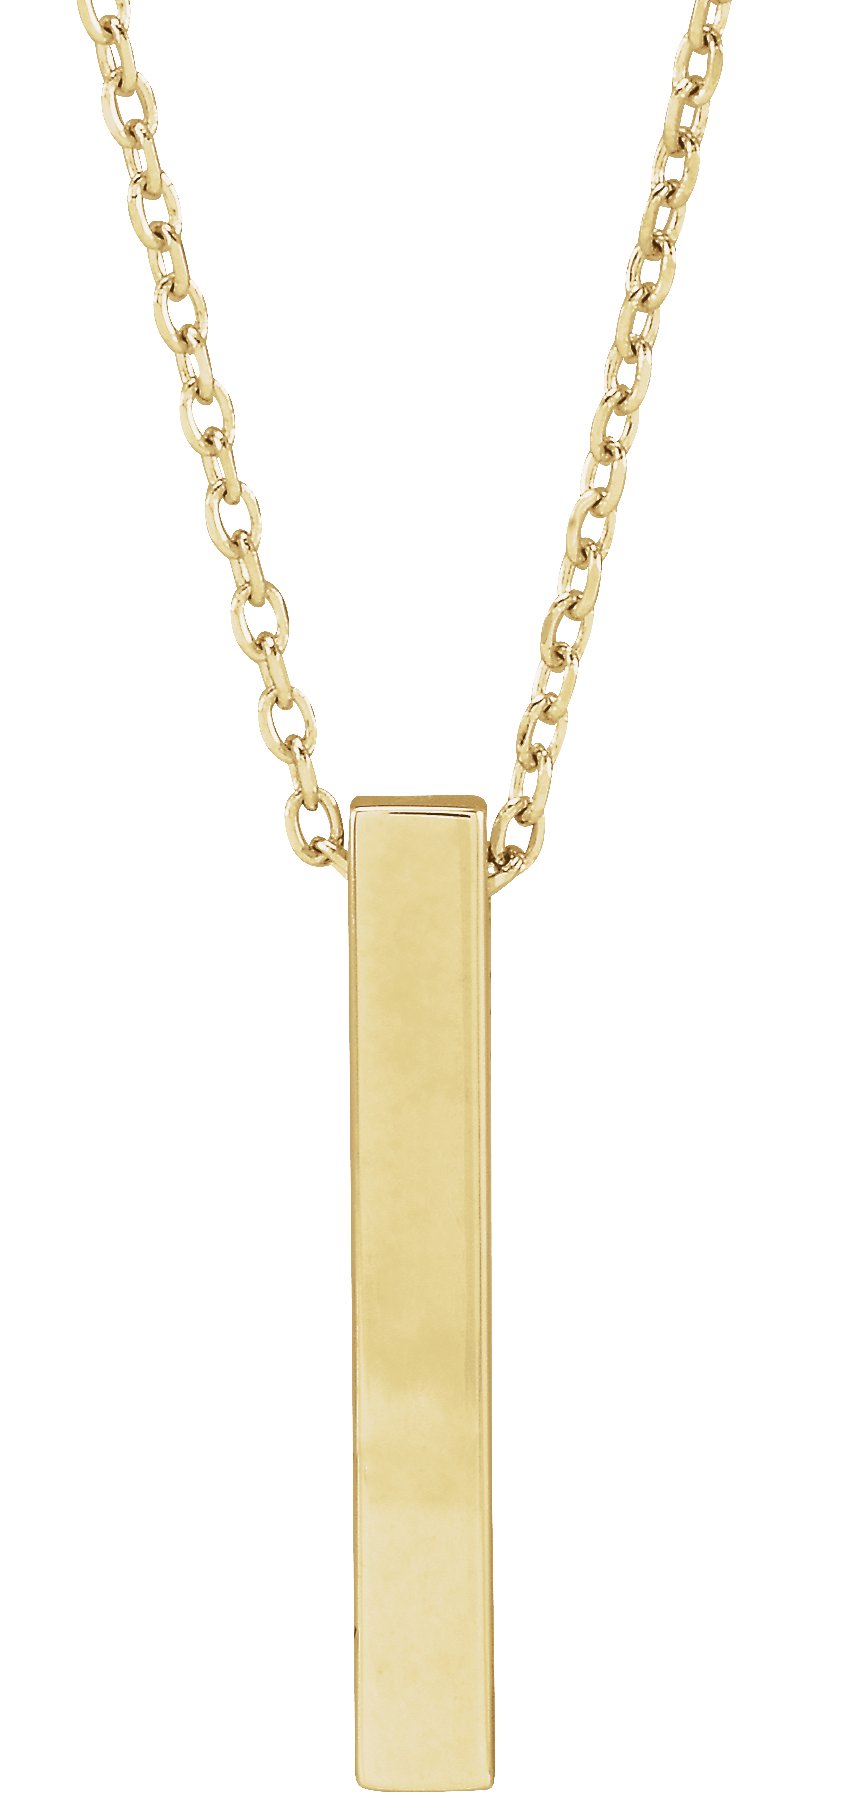 14K Yellow Engravable Four-Sided Bar 16-18" Necklace